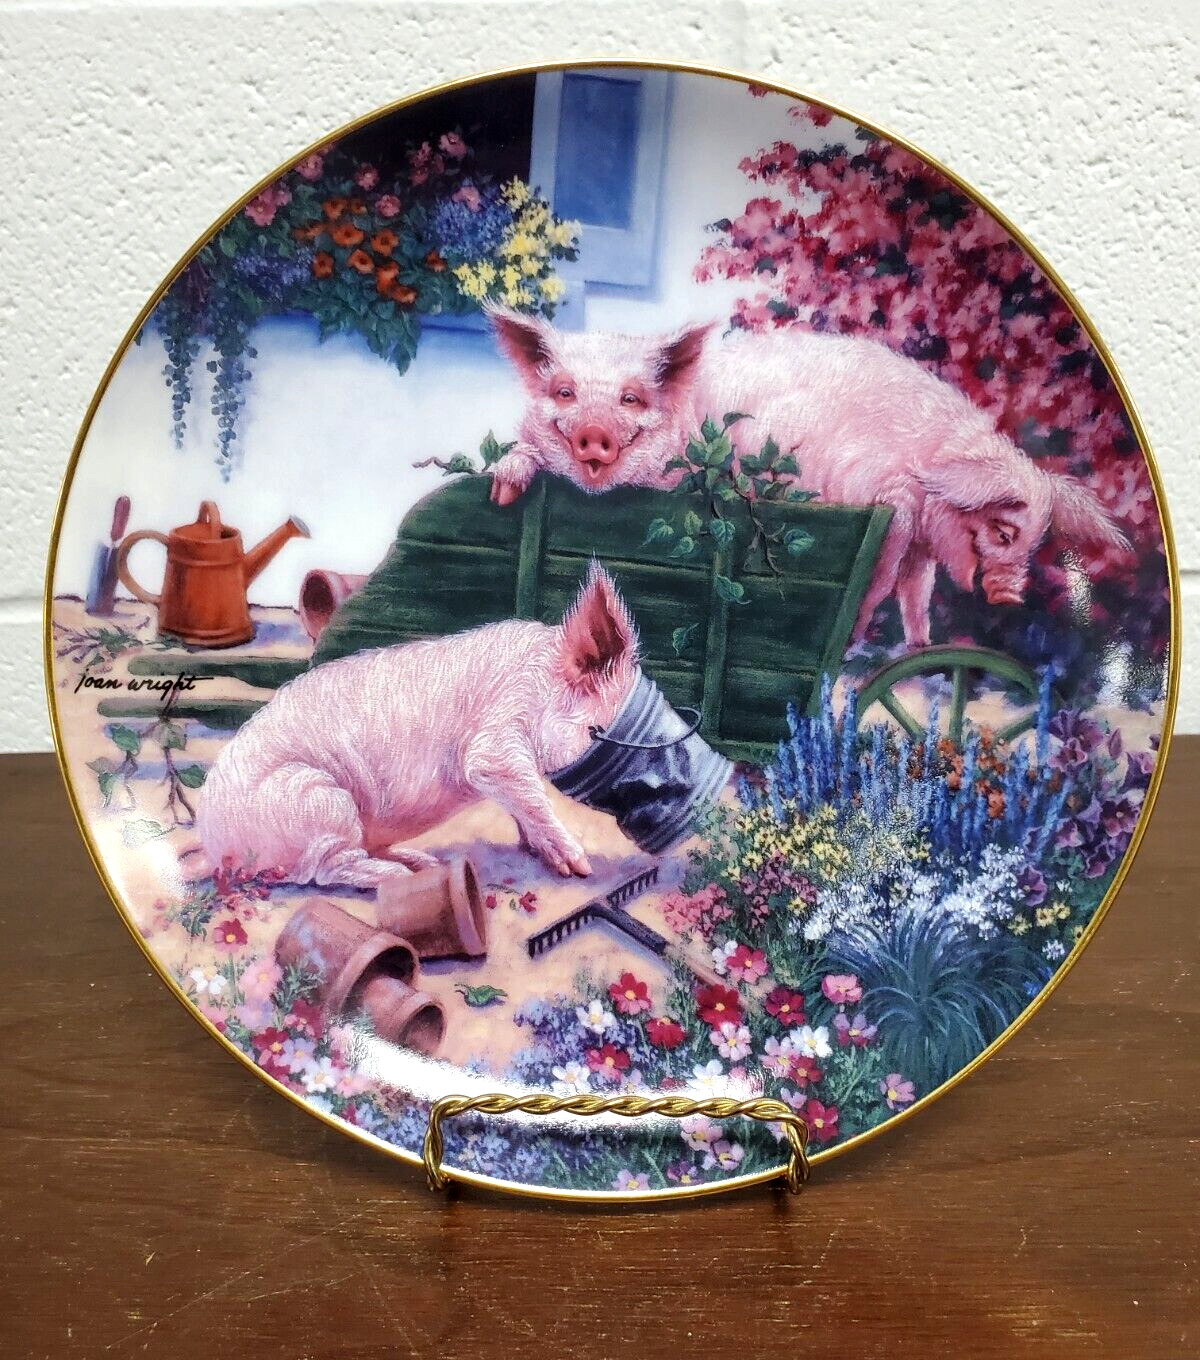 Squealbarrow by Joan Wright Pigs in Bloom Danbury Mint Collector Plate